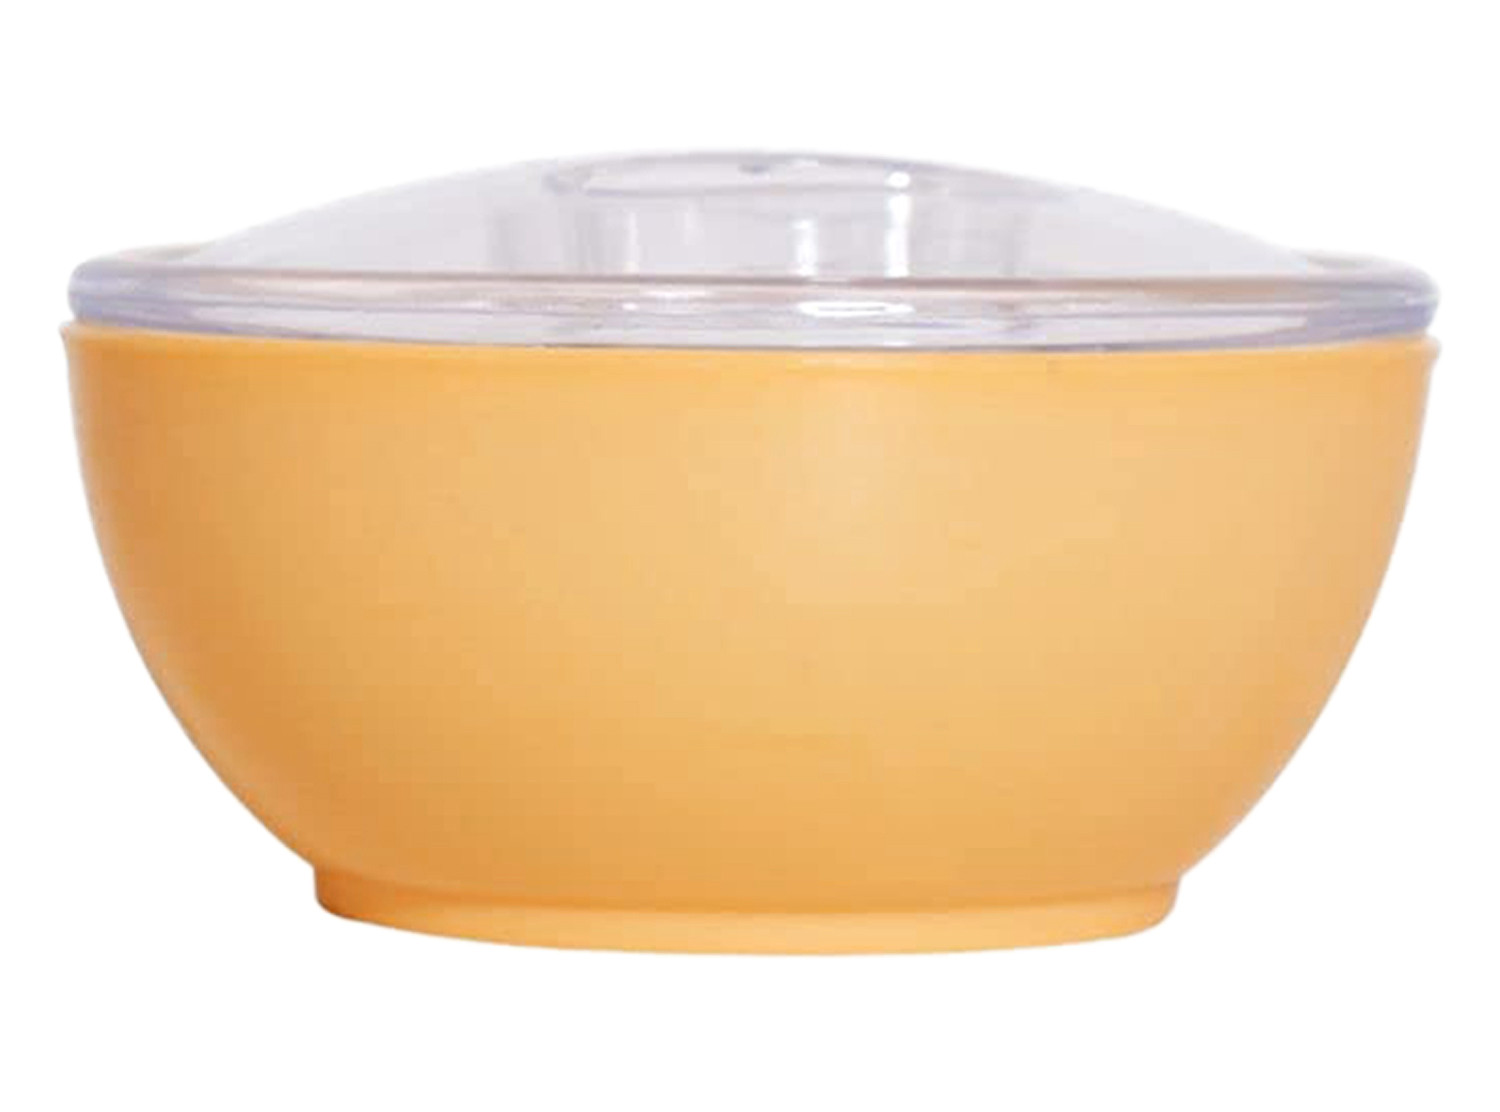 Kuber Industries Plastic 2 Bowls & 1 Tray Set For Serving & Store Dry Fruits, candies, Snacks With Silicon Rubberized Ring Lid (Autumn Orange)